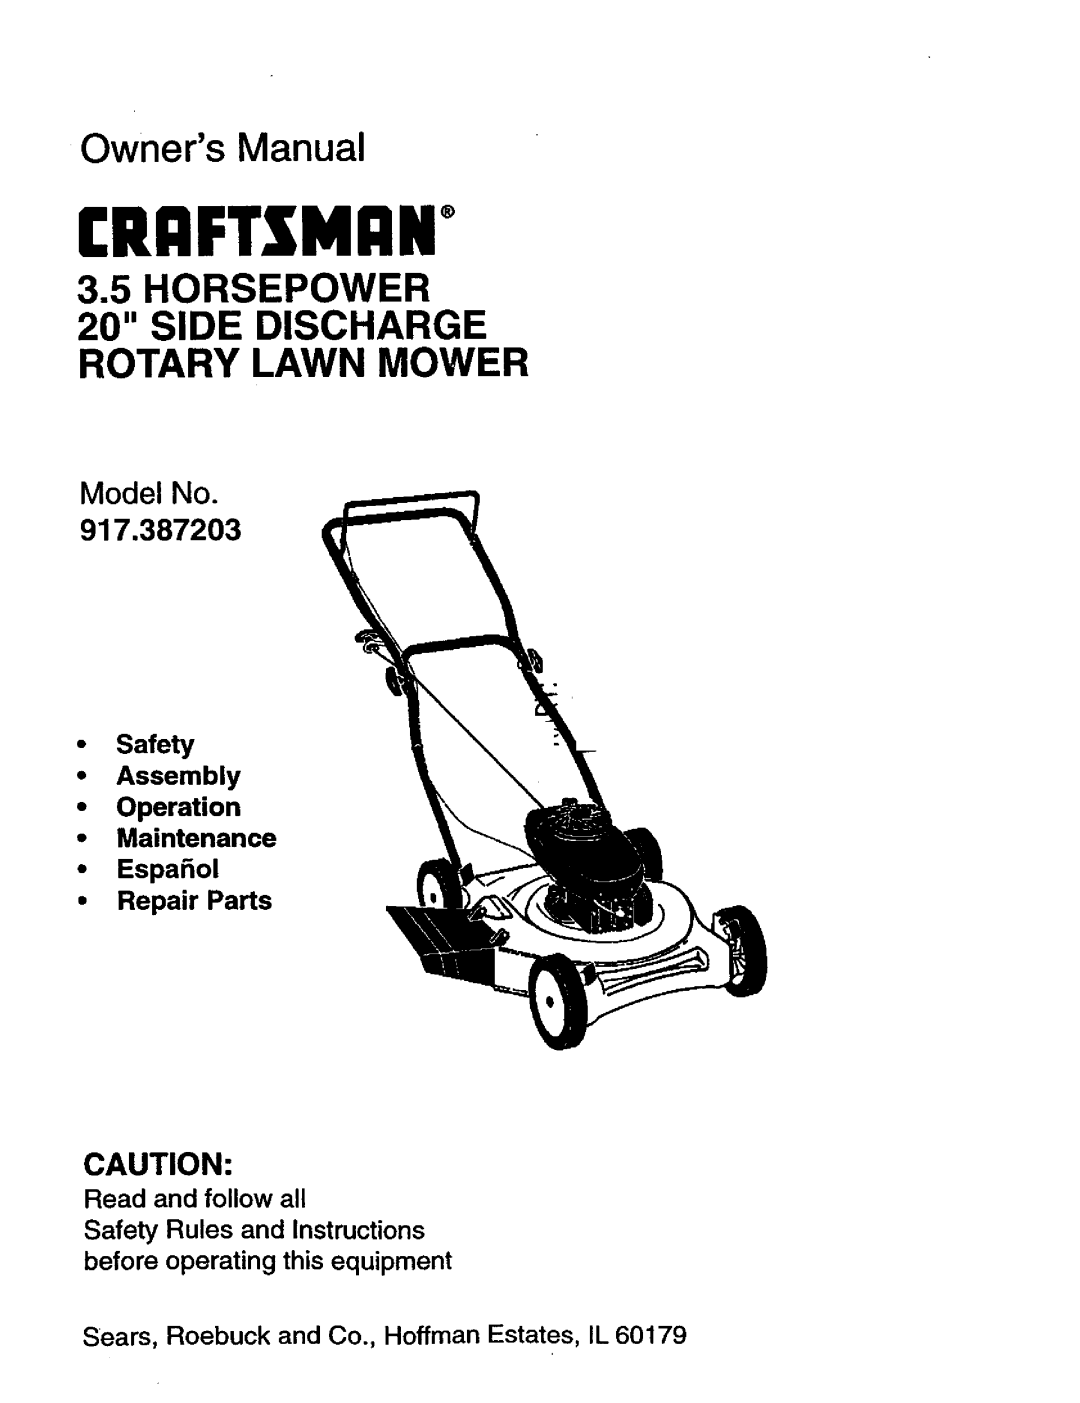 Craftsman 917.387203 owner manual Safety Assembly Operation Maintenance, EspaSol Repair Parts, Read and follow all 